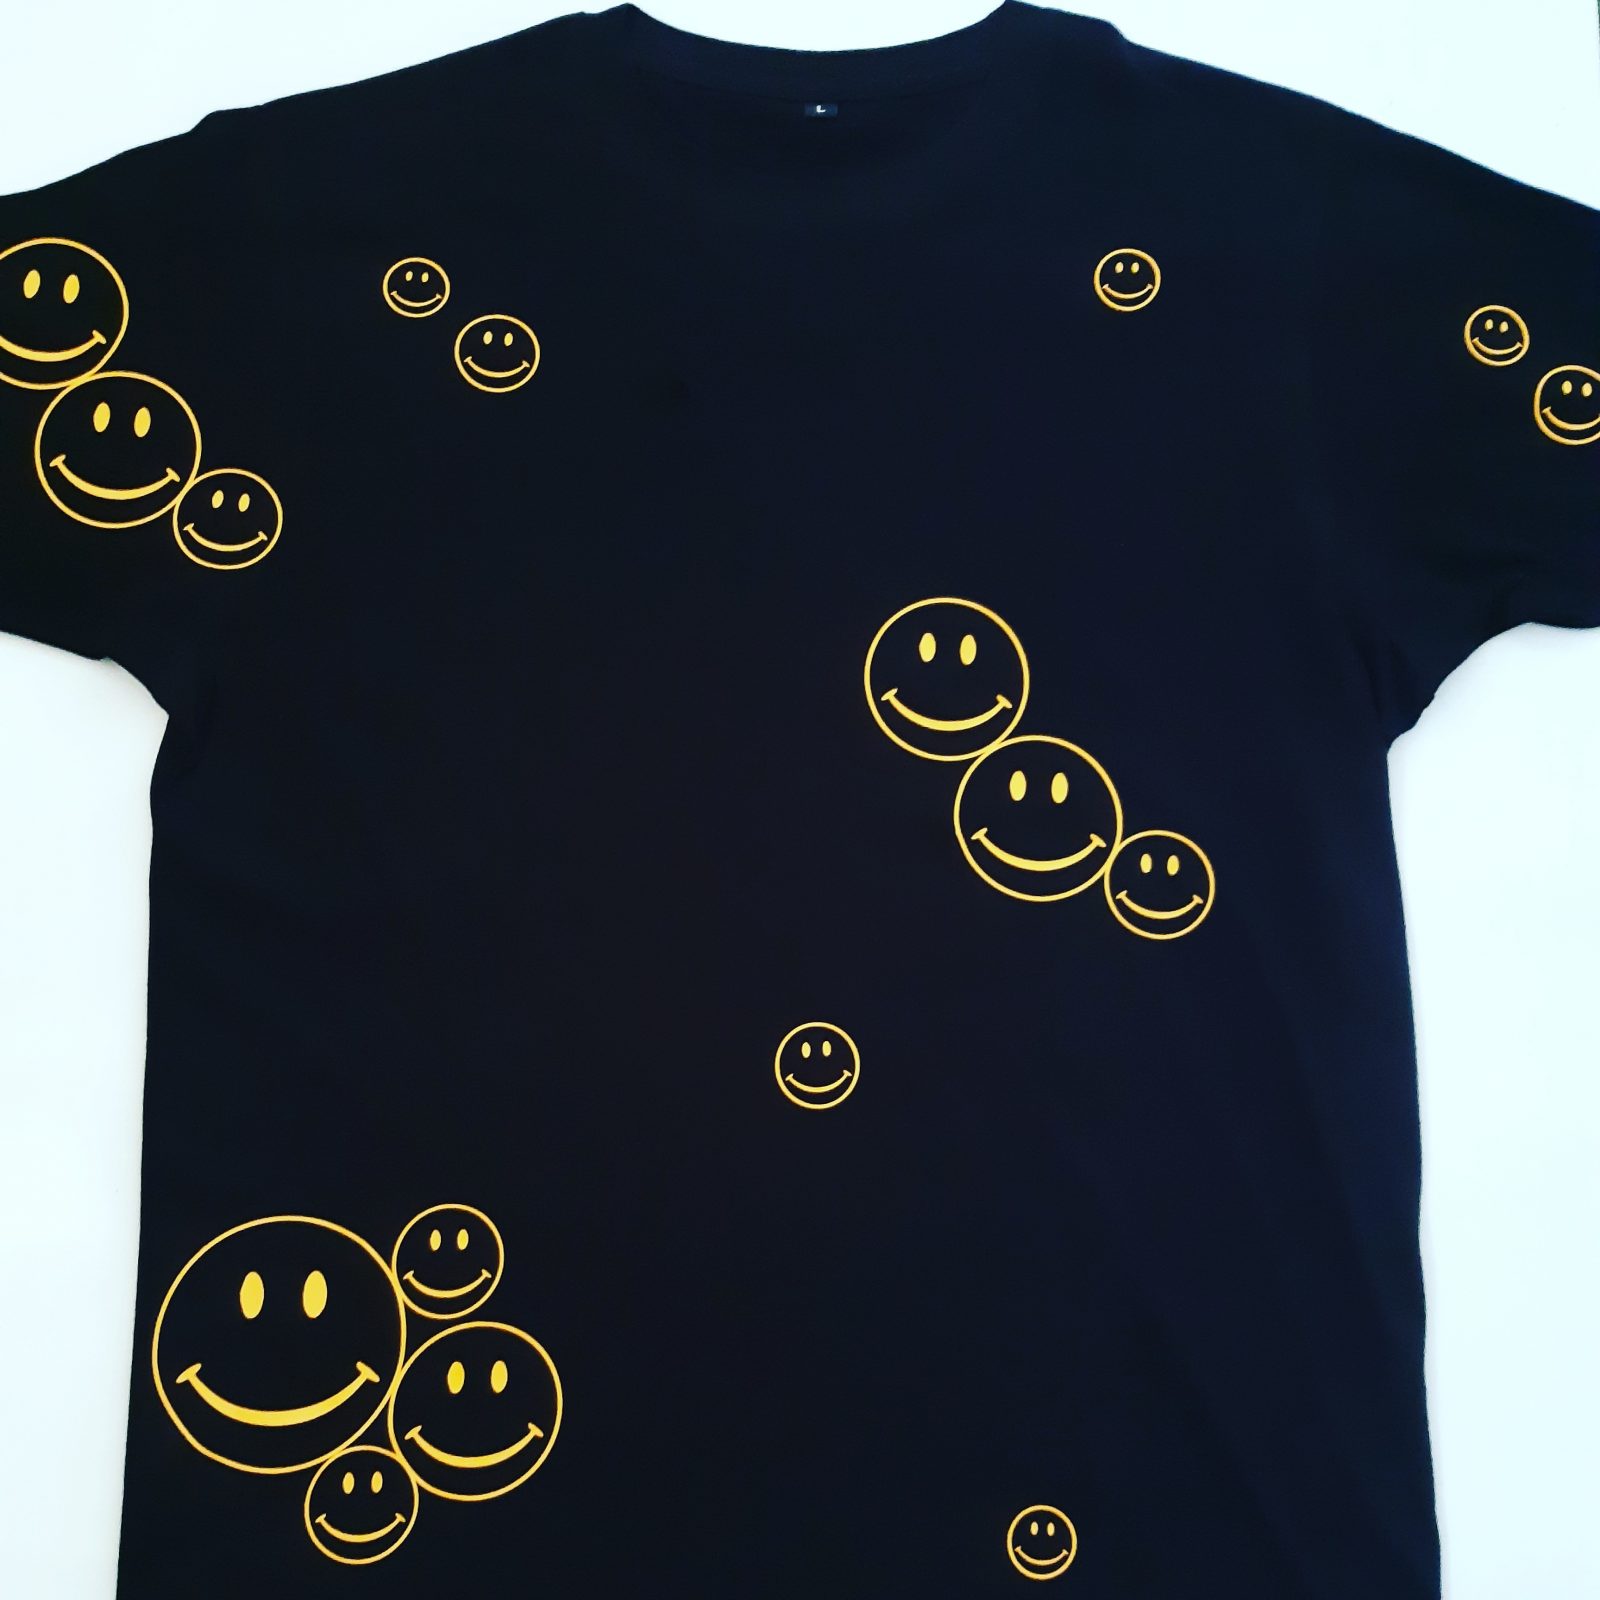 Smiley Acid Face T shirt - Customised - Trash Industries - fashion - trends - Clothing -